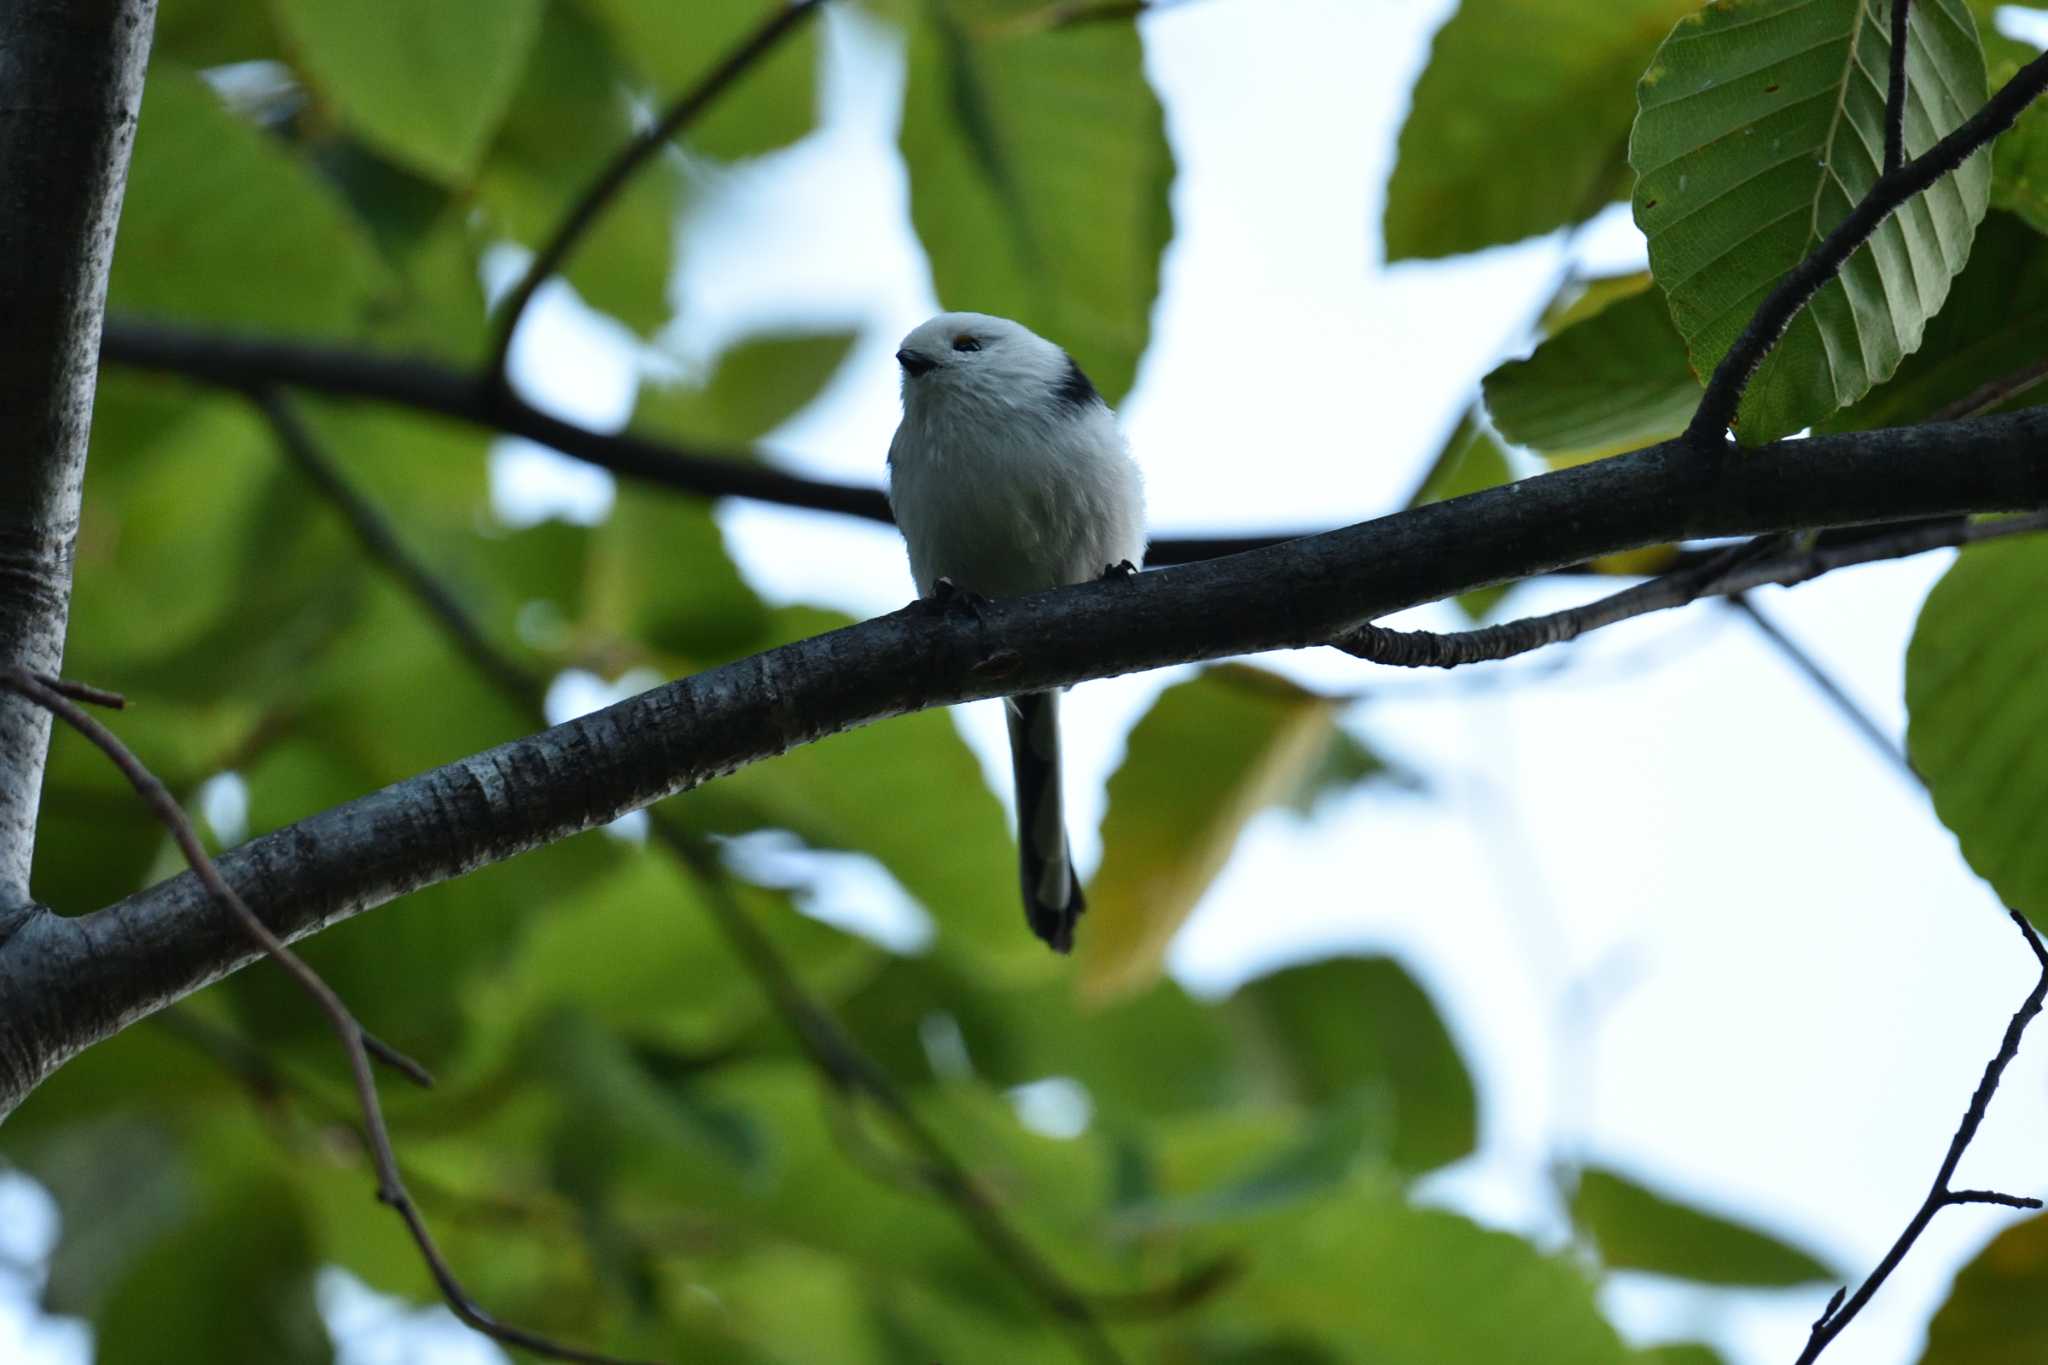 Photo of Long-tailed tit(japonicus) at Nishioka Park by North* Star*